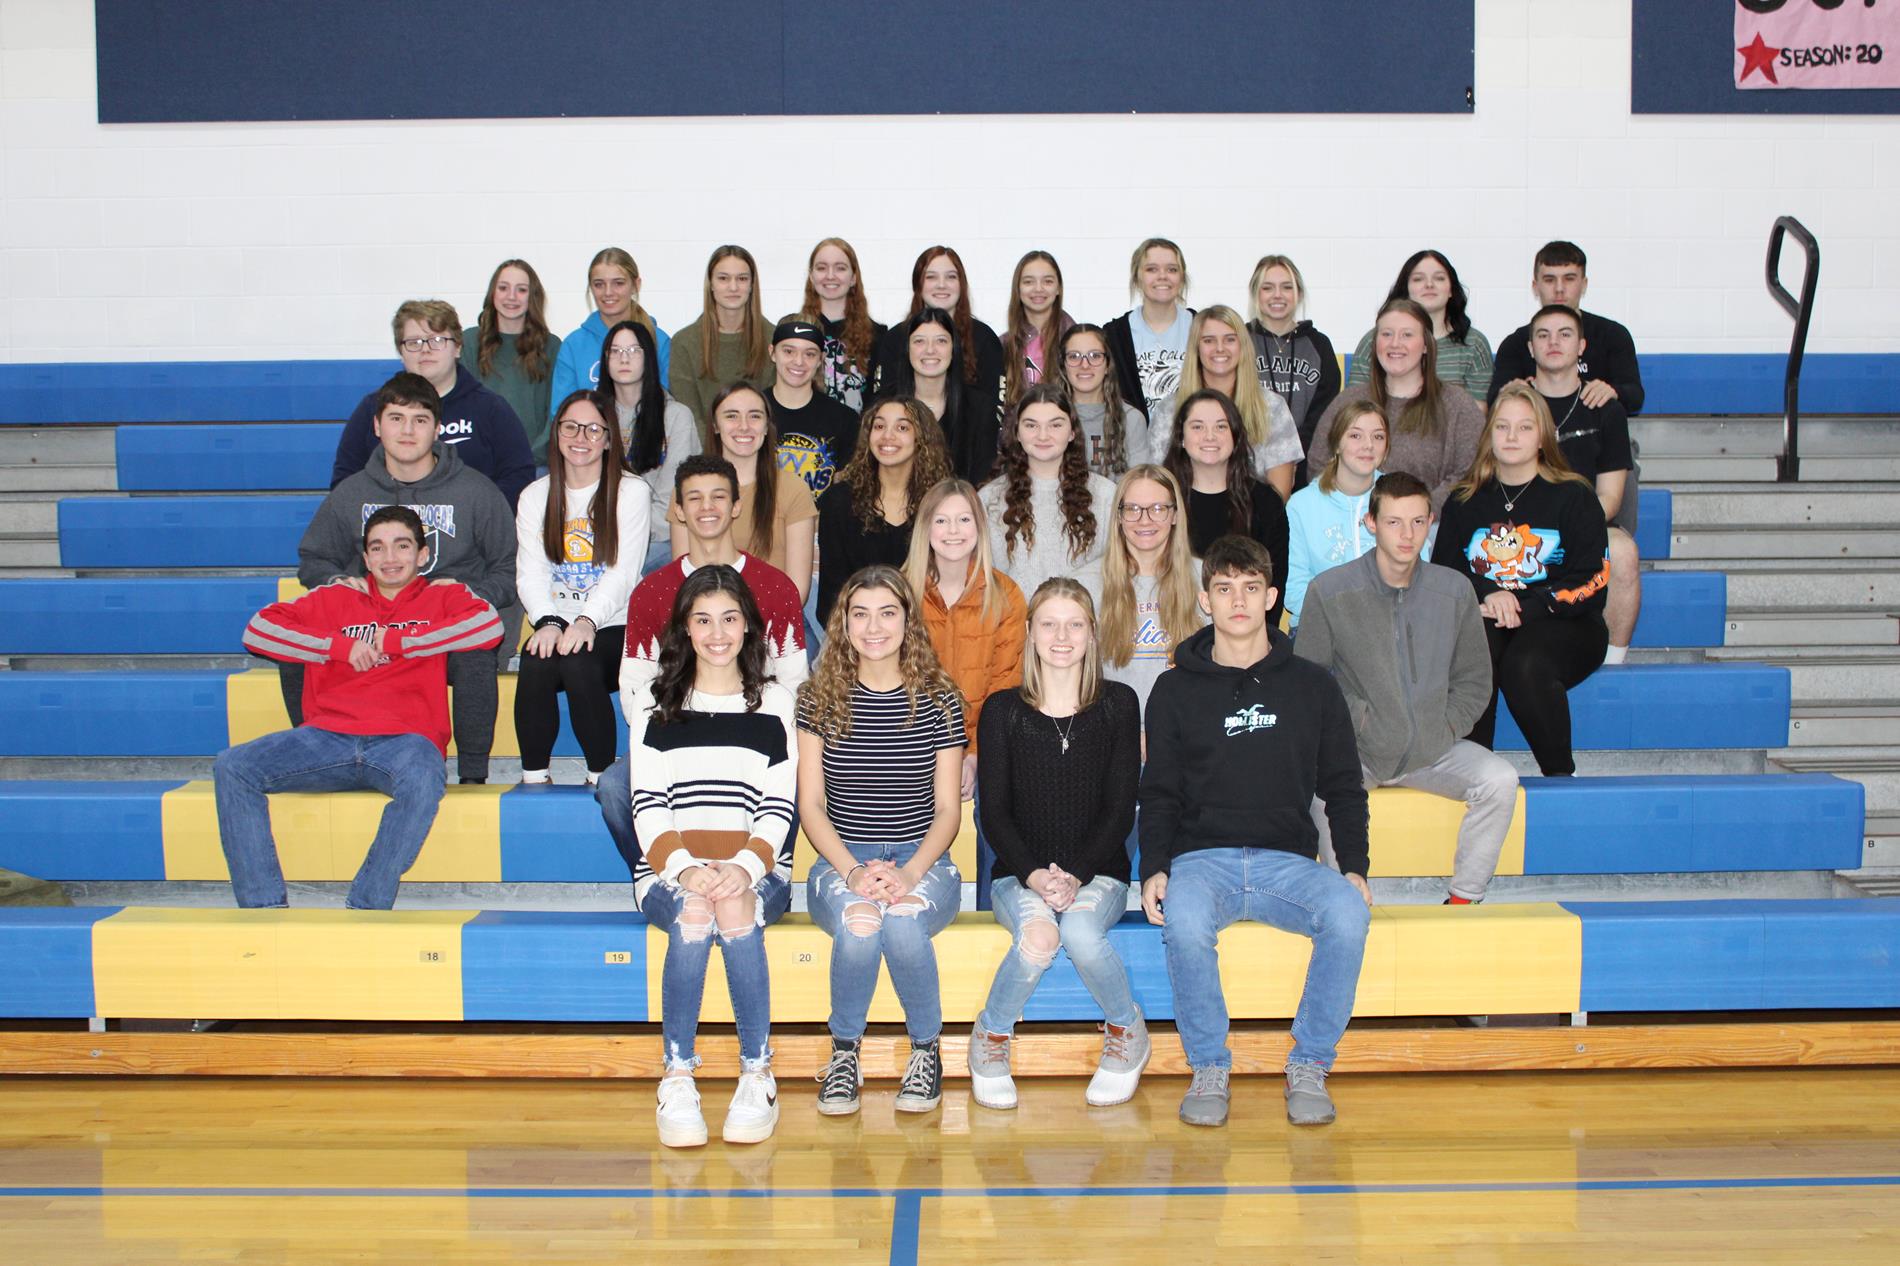 Spanish Club 22-23 Officers and Members